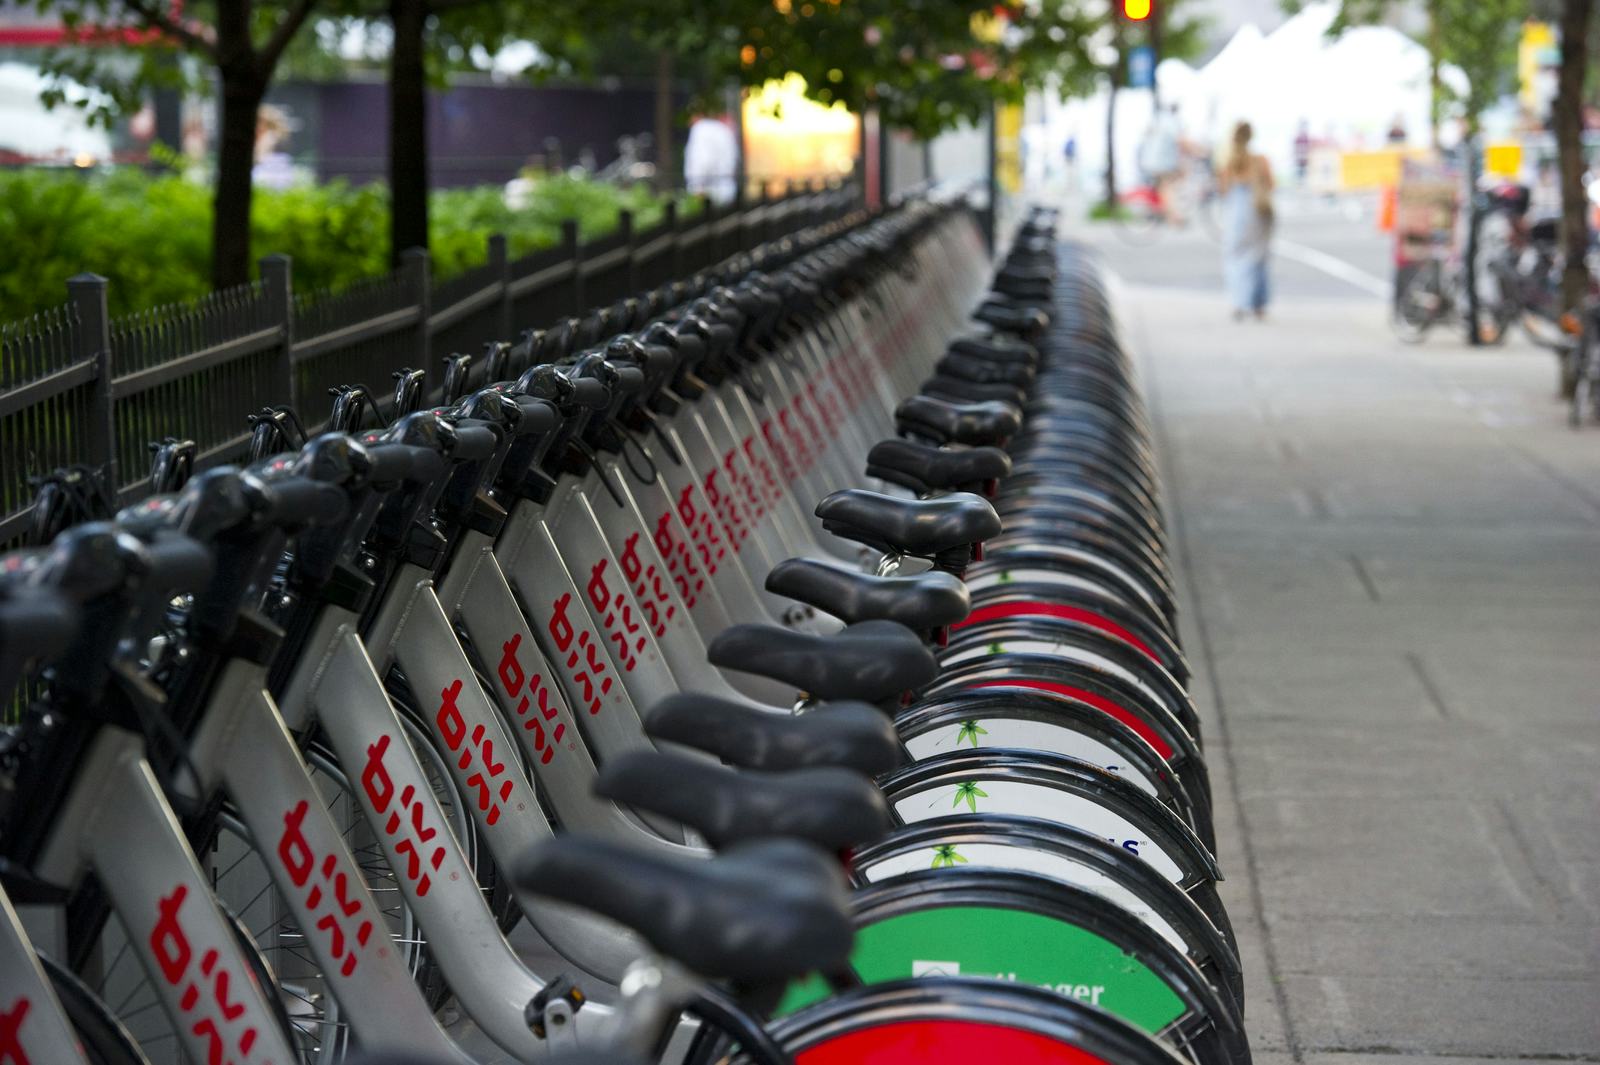 Currently more than 37,000 Bixi bikes are available at 2,676 rental stations around the world. – Photo Bixi